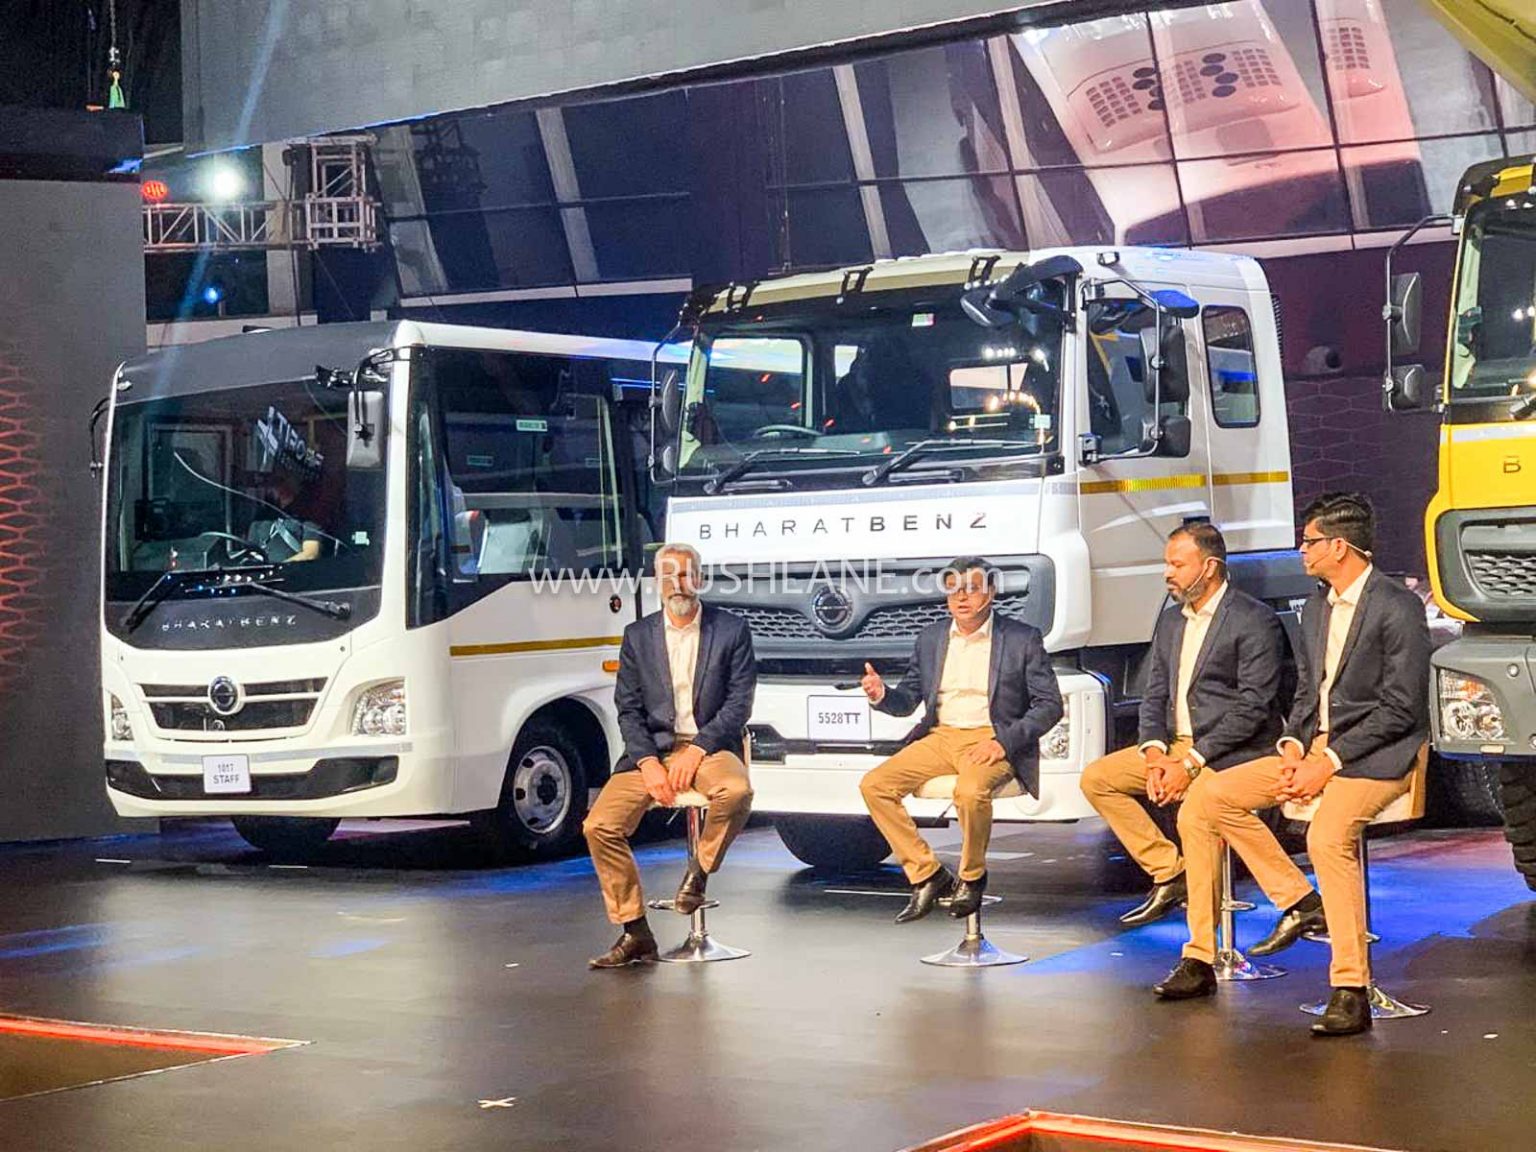 2020 Daimler Bharat Benz BS6 Trucks and Buses unveiled in India